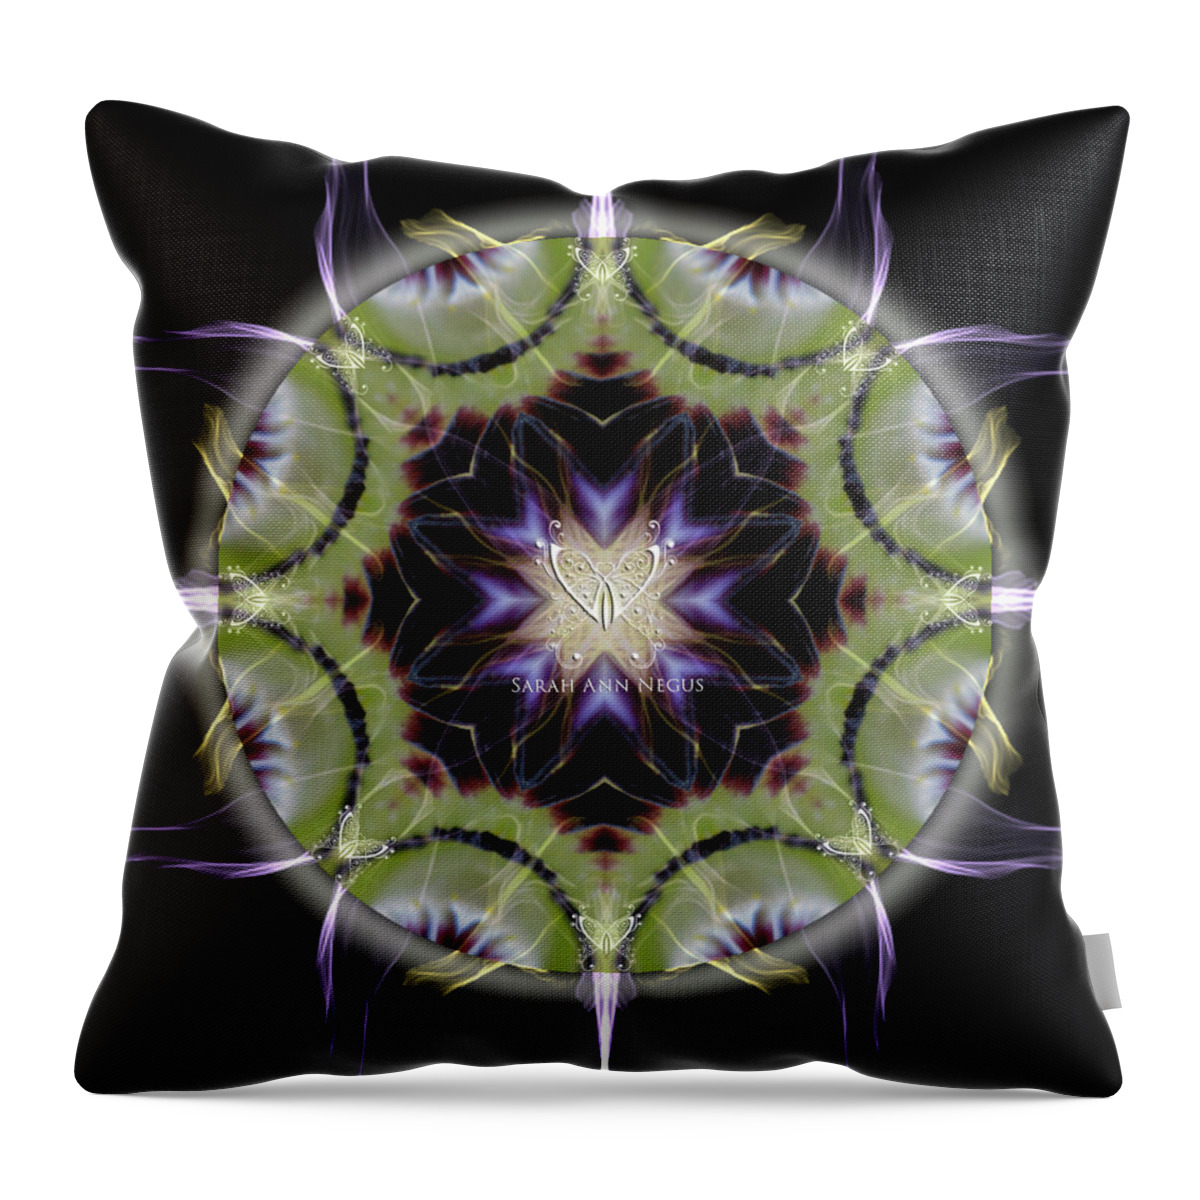  Throw Pillow featuring the digital art Soul Star Shaman by Alicia Kent